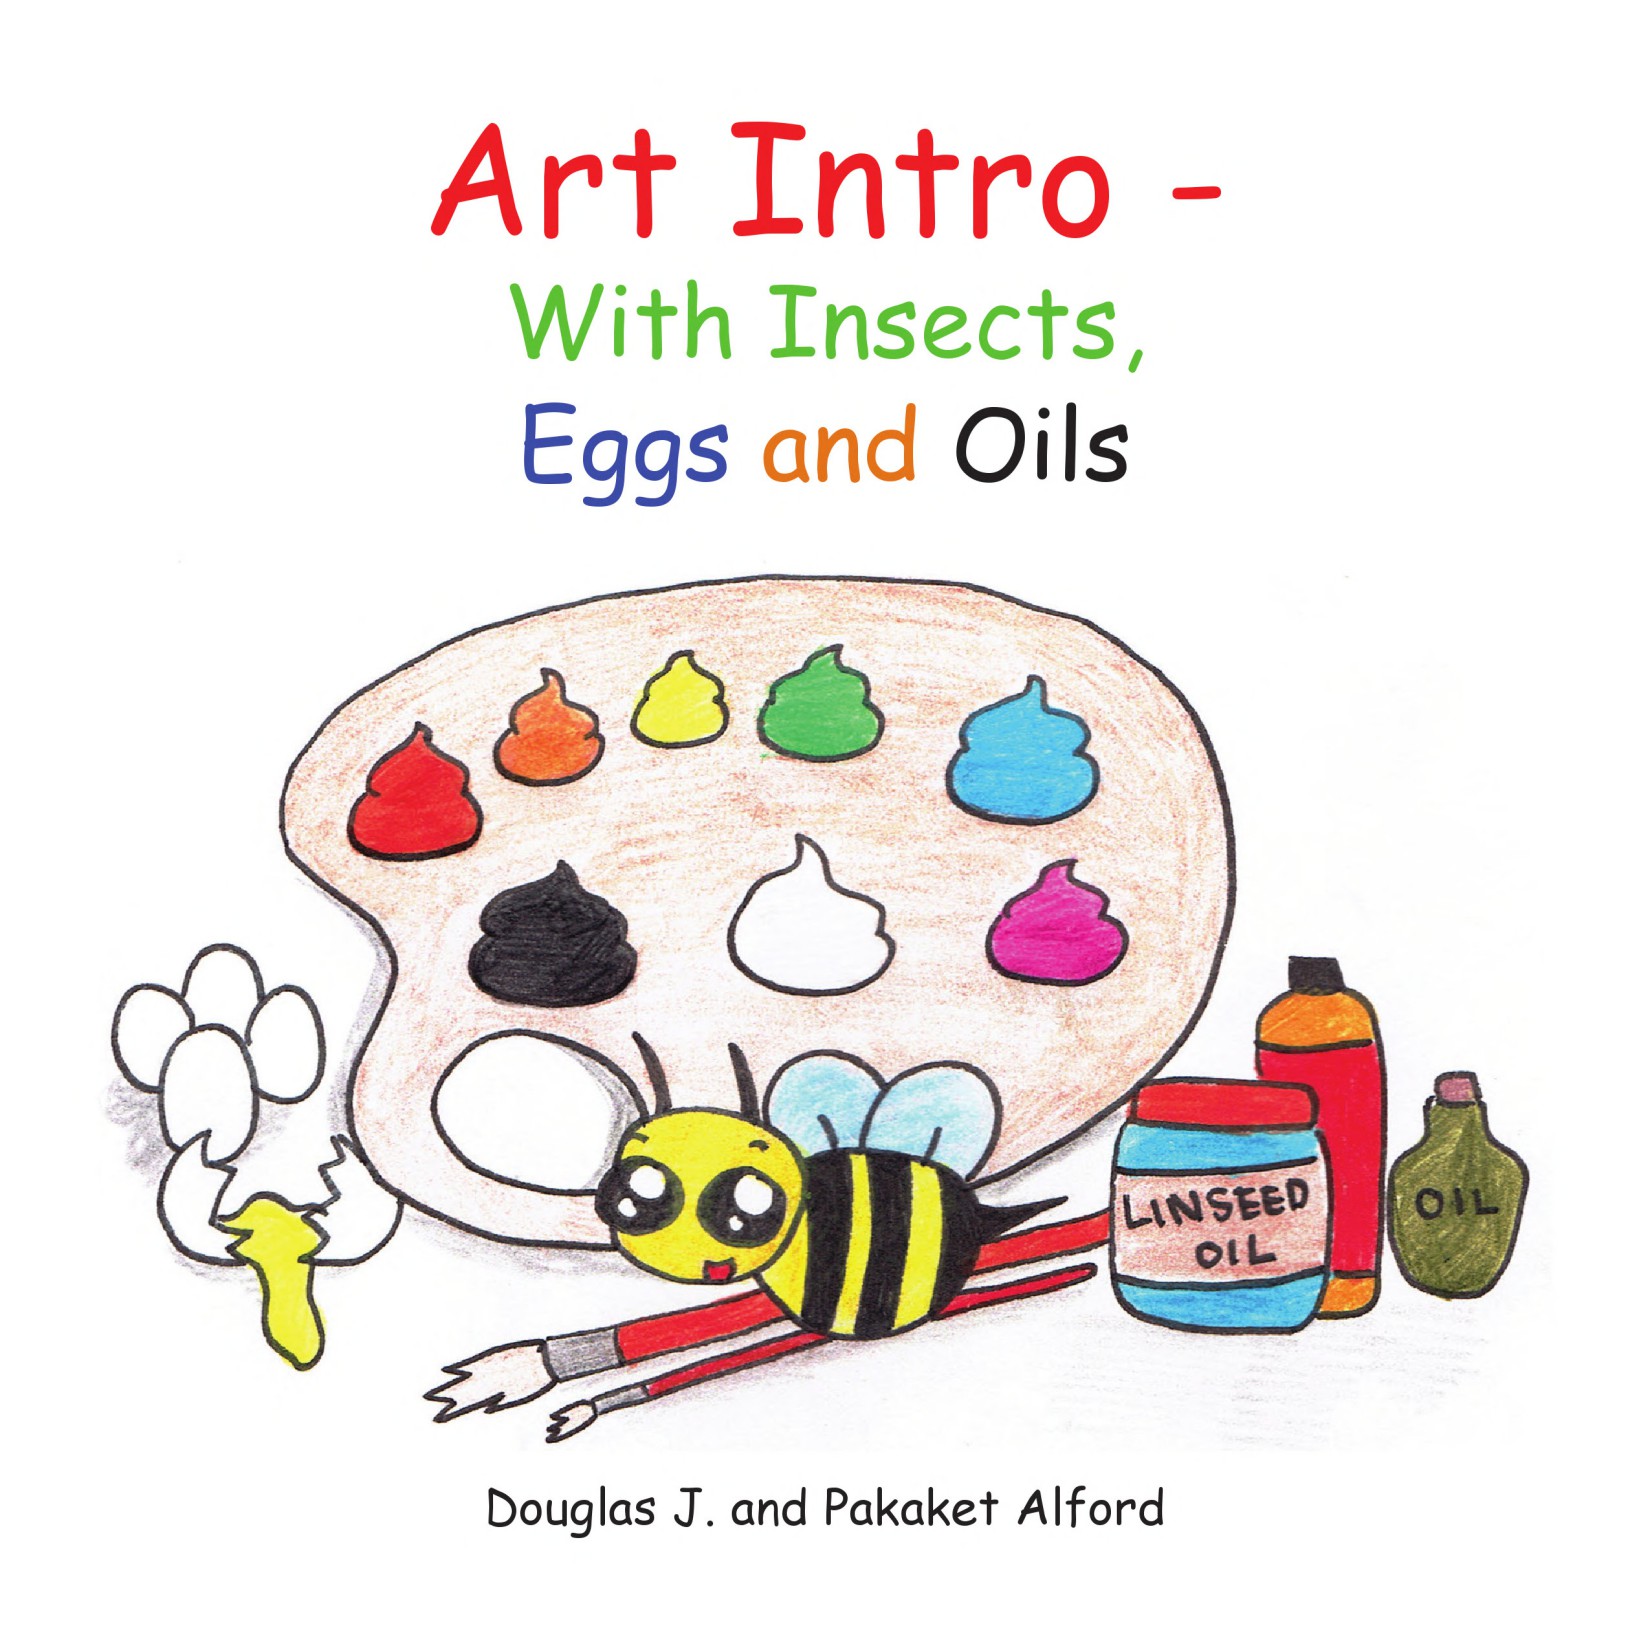 Art Intro- With Insects, Eggs and Oil